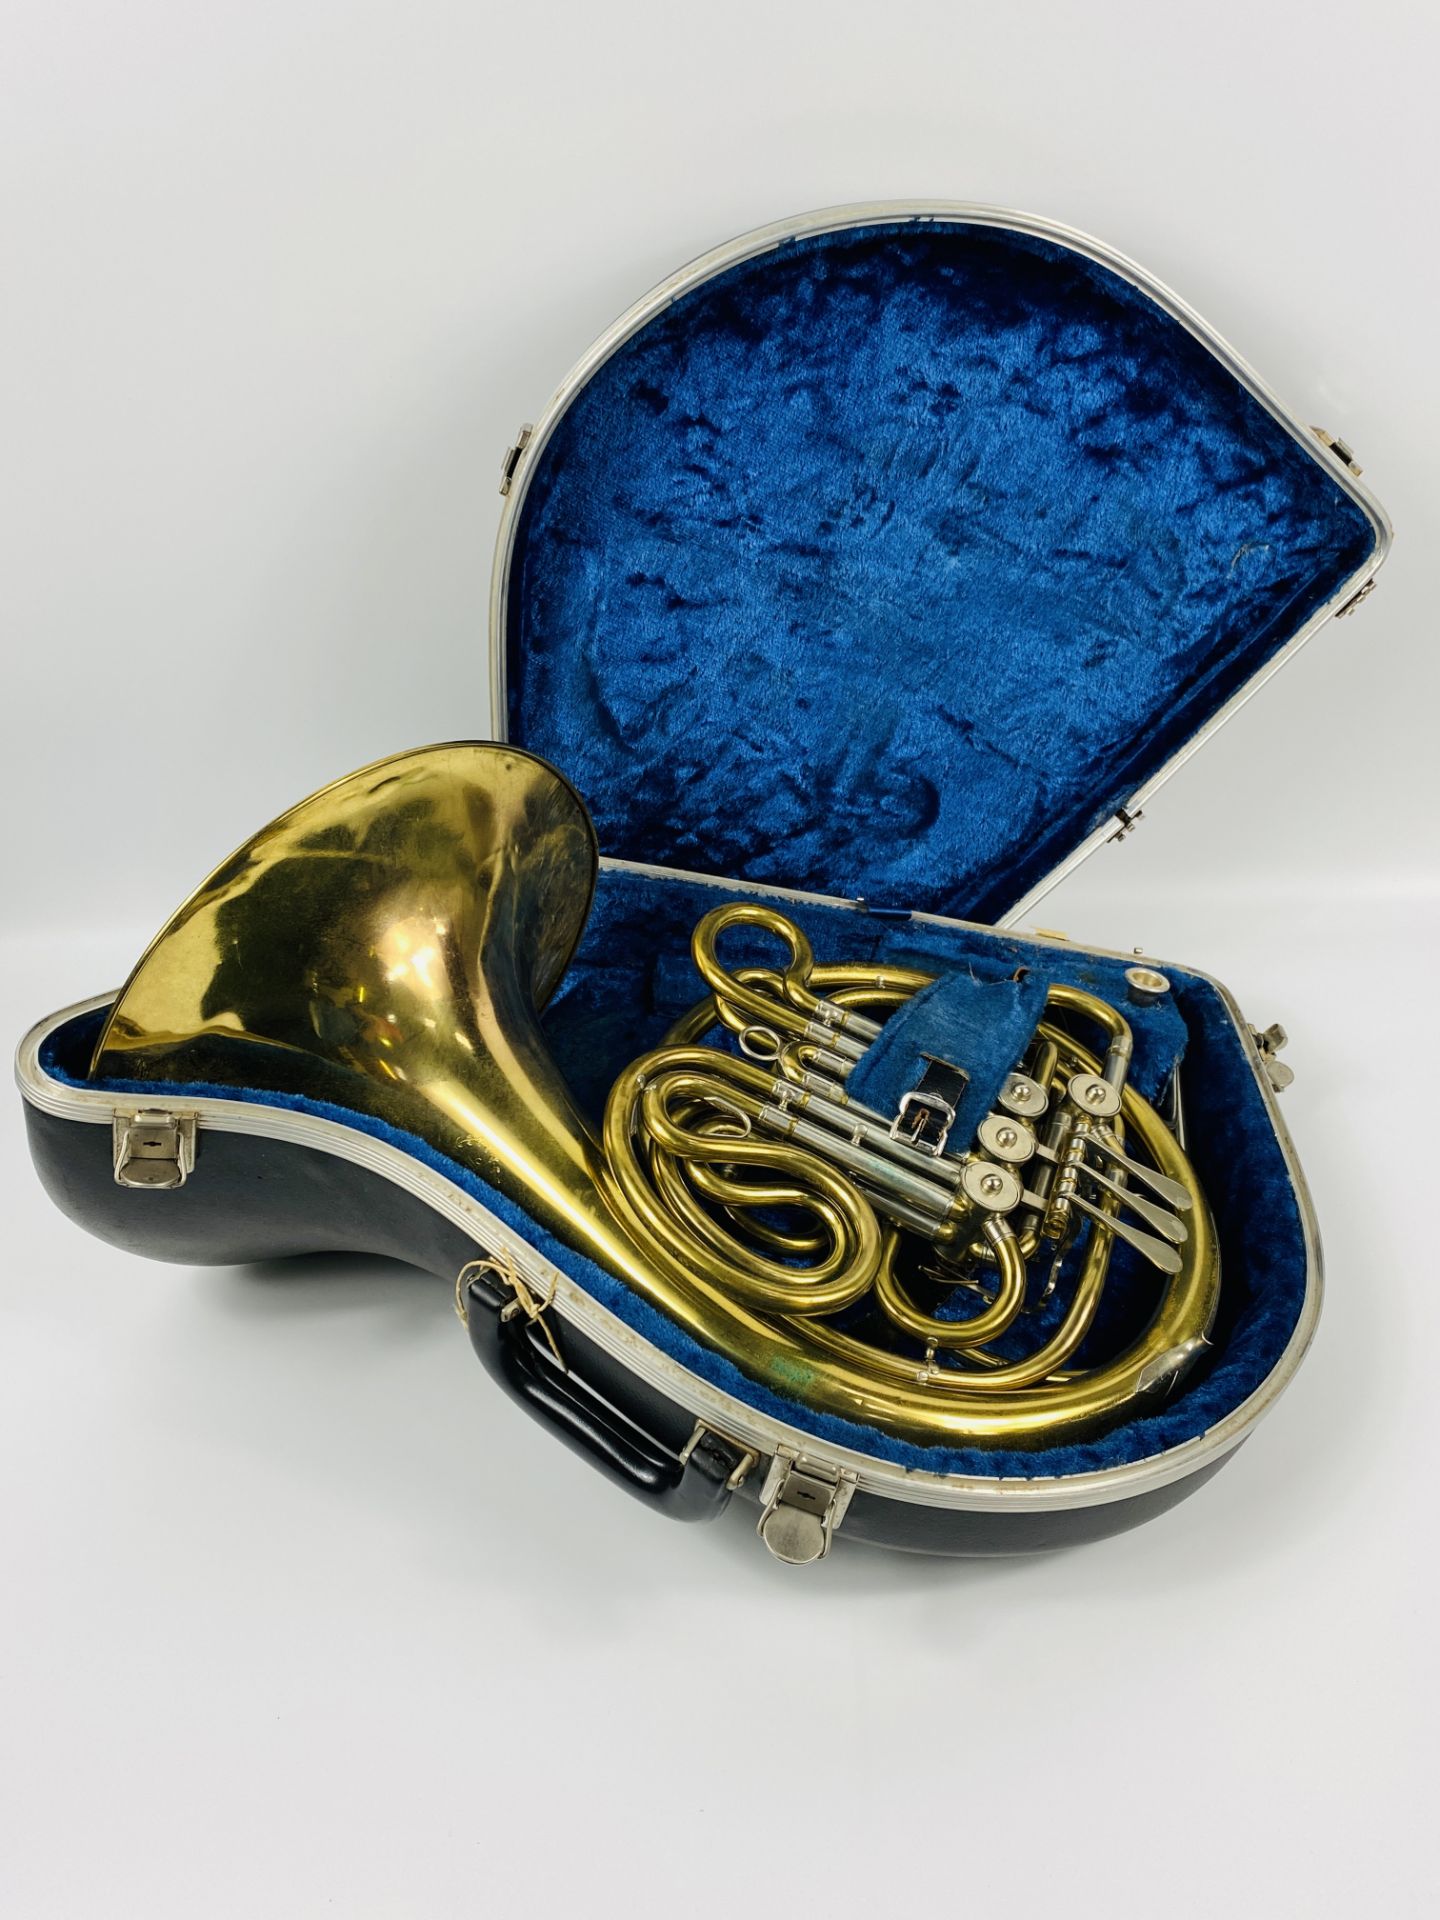 French horn in carry case - Image 3 of 8